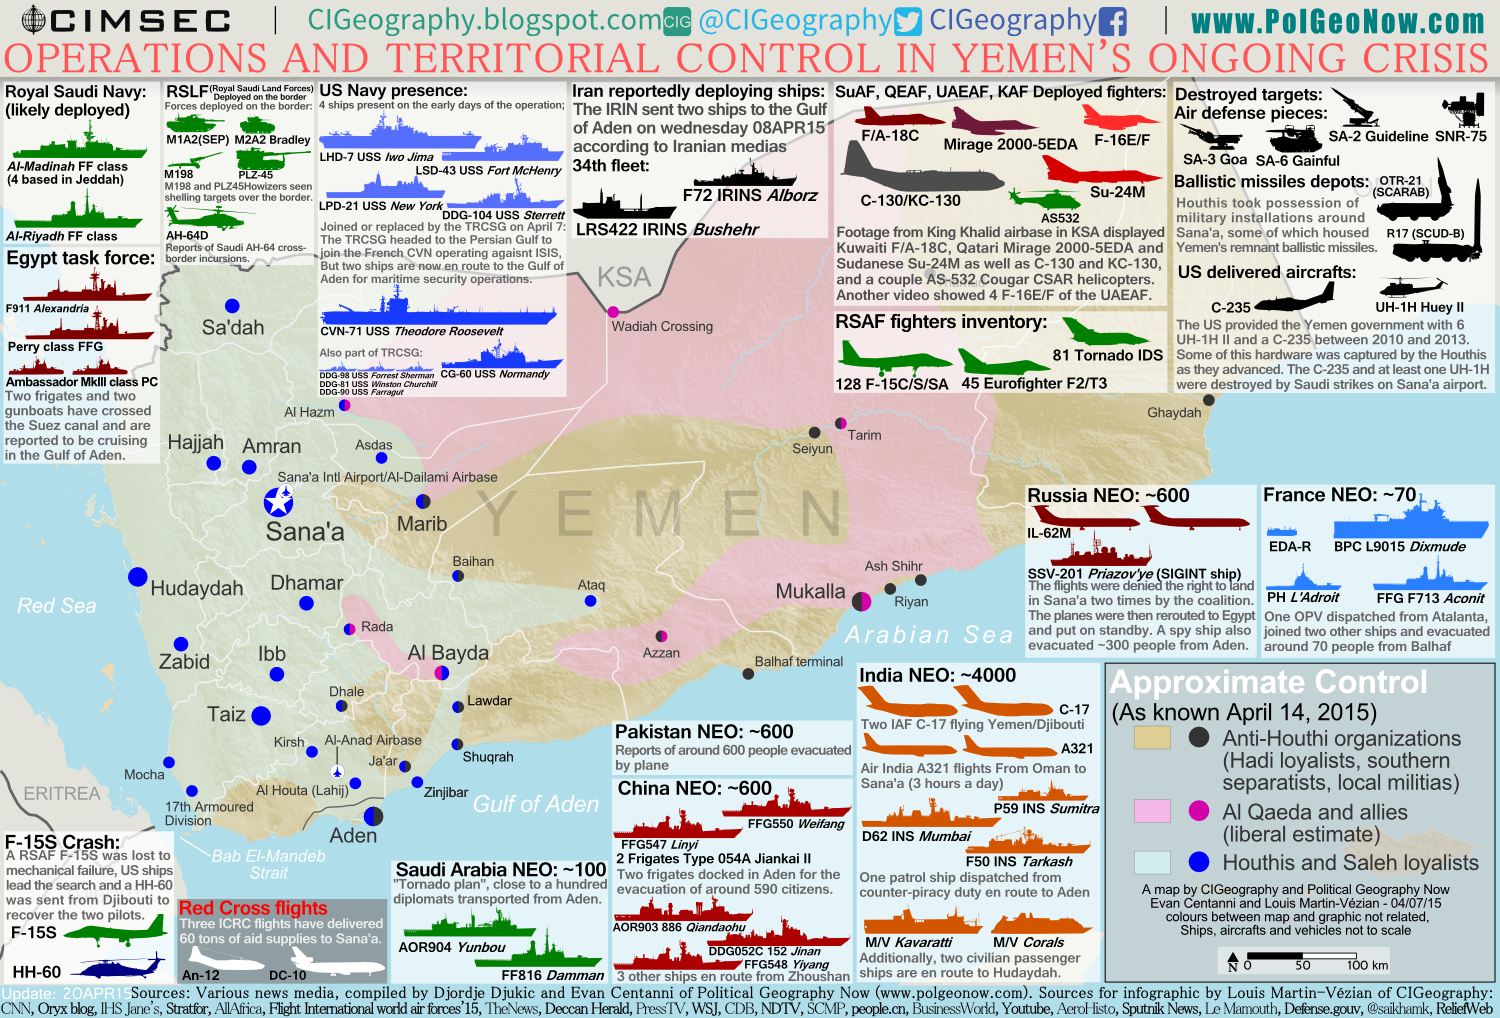 The following is an overview of confirmed and probable ships near Yemen updated as of April, 20. Image courtesy of the Center for International Maritime Security